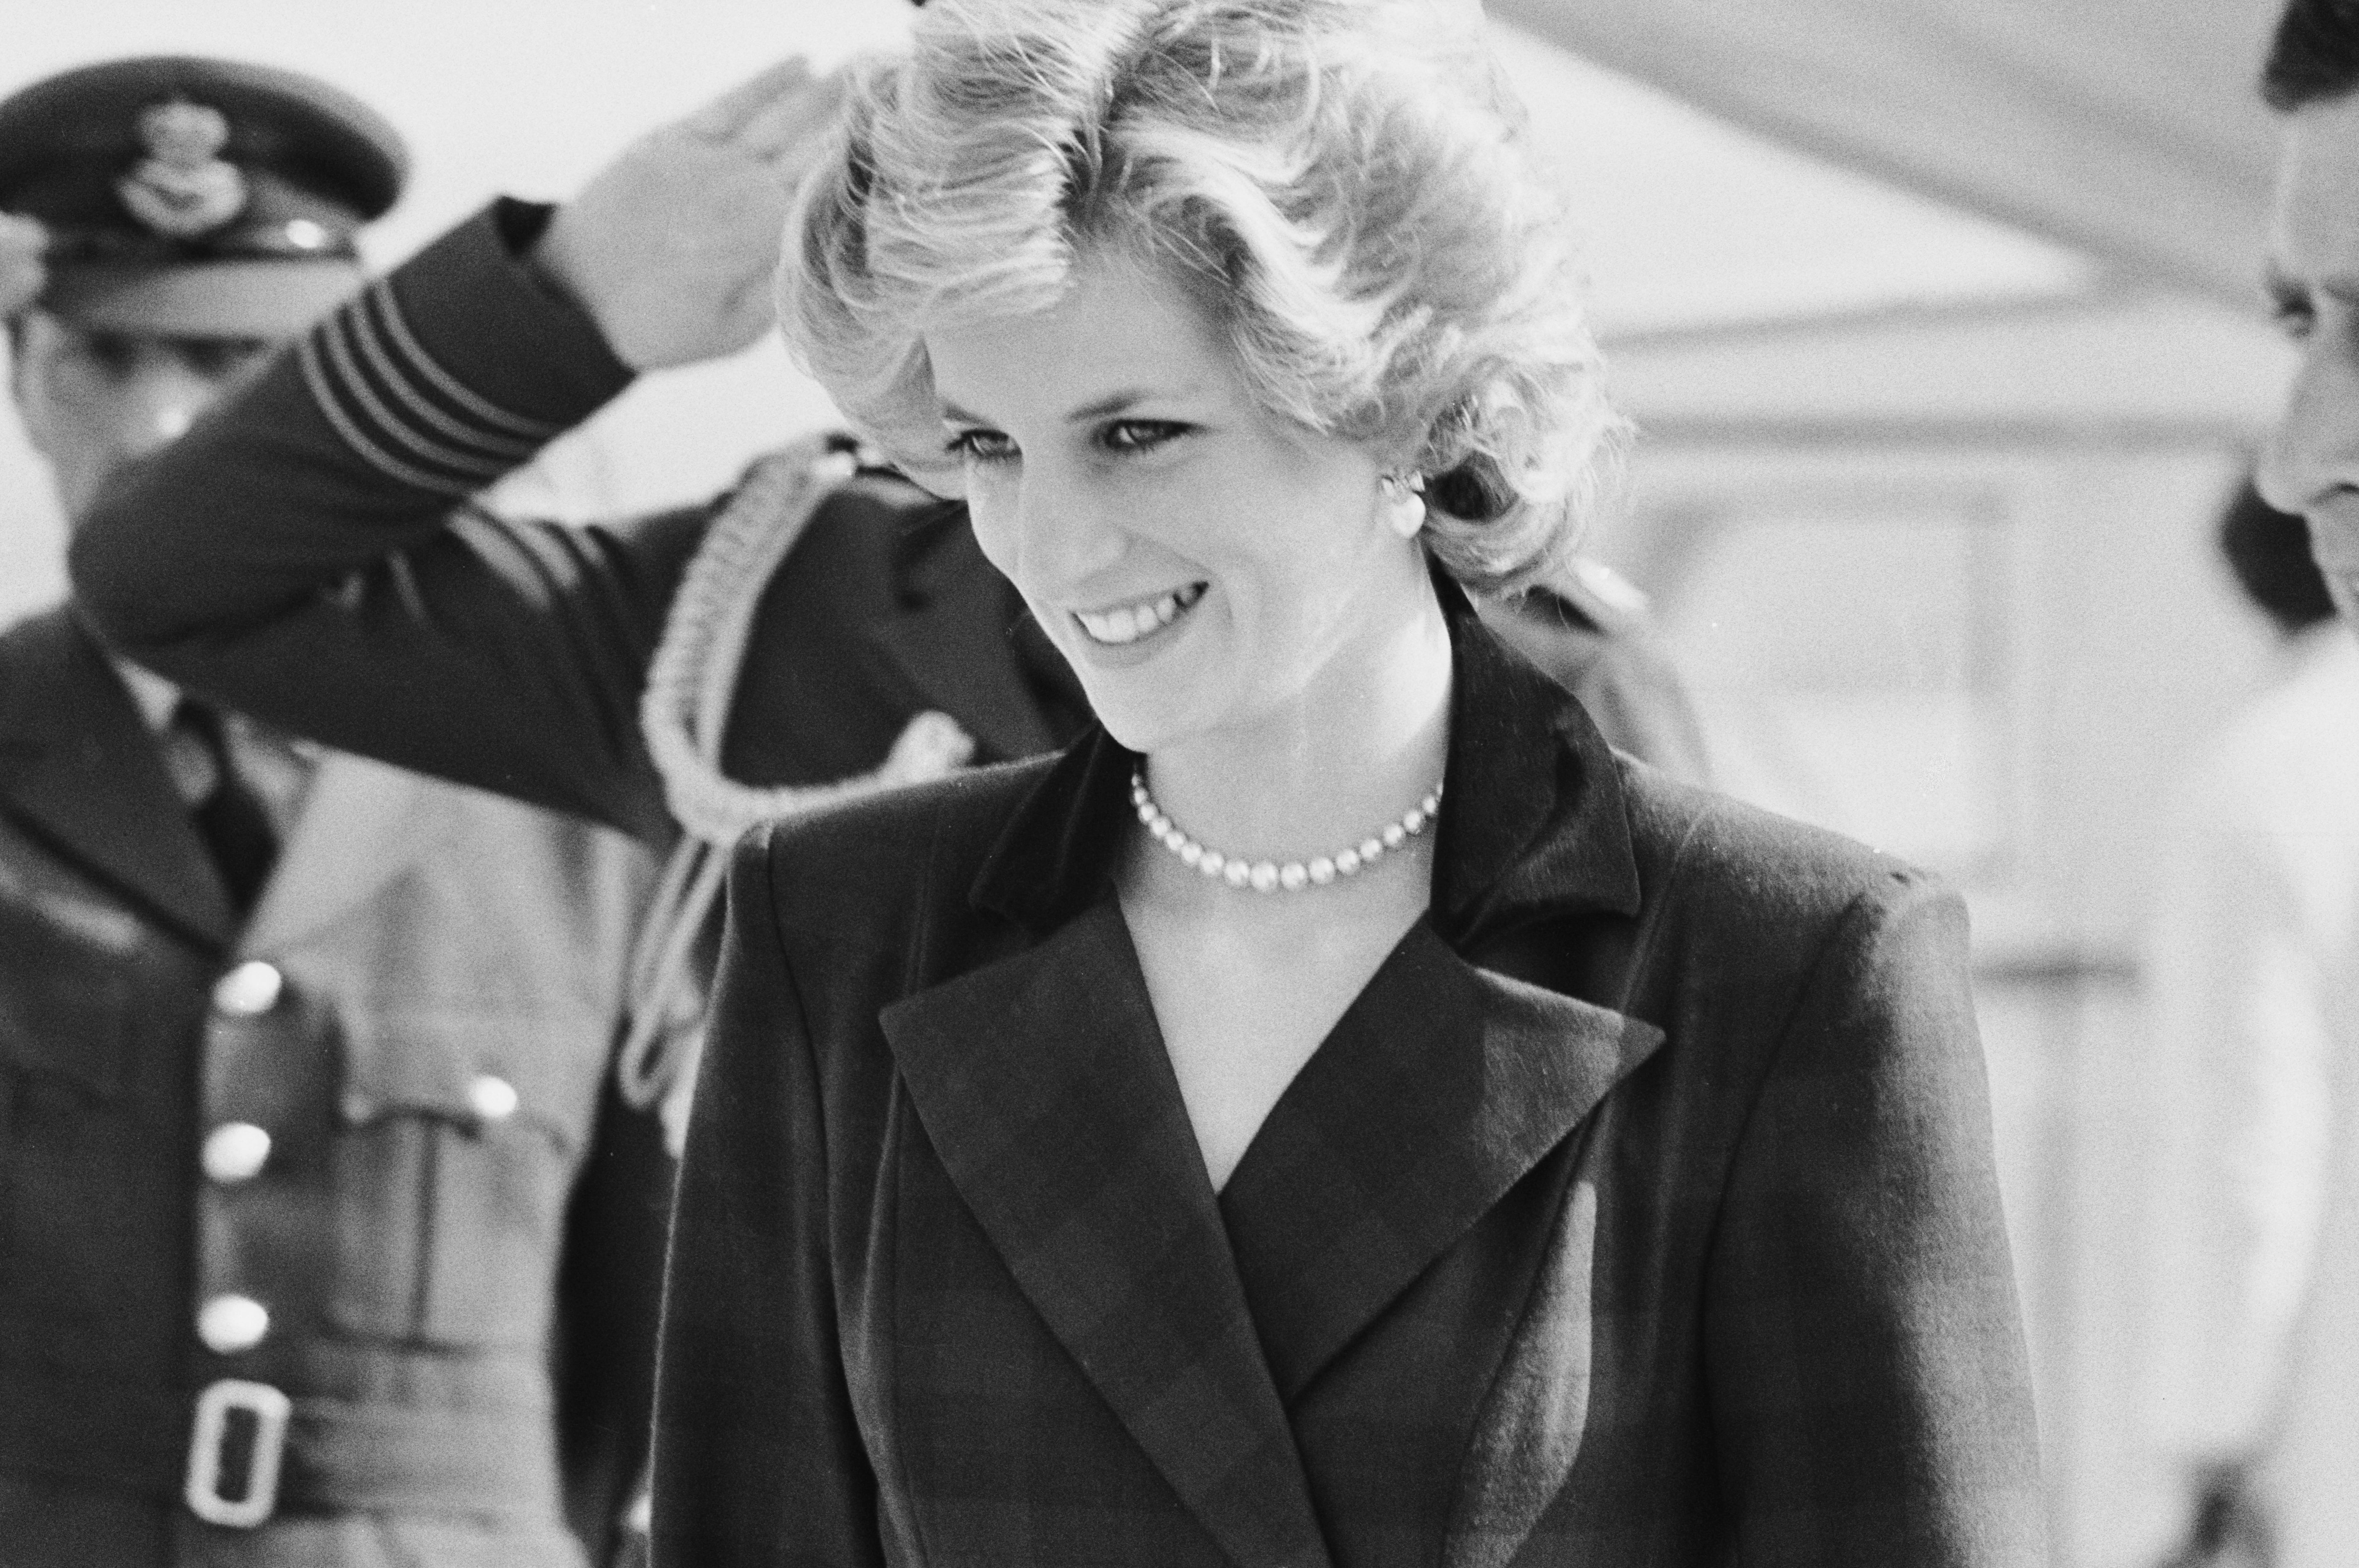 A new documentary looks into the police investigations that followed the car crash that killed Princess Diana